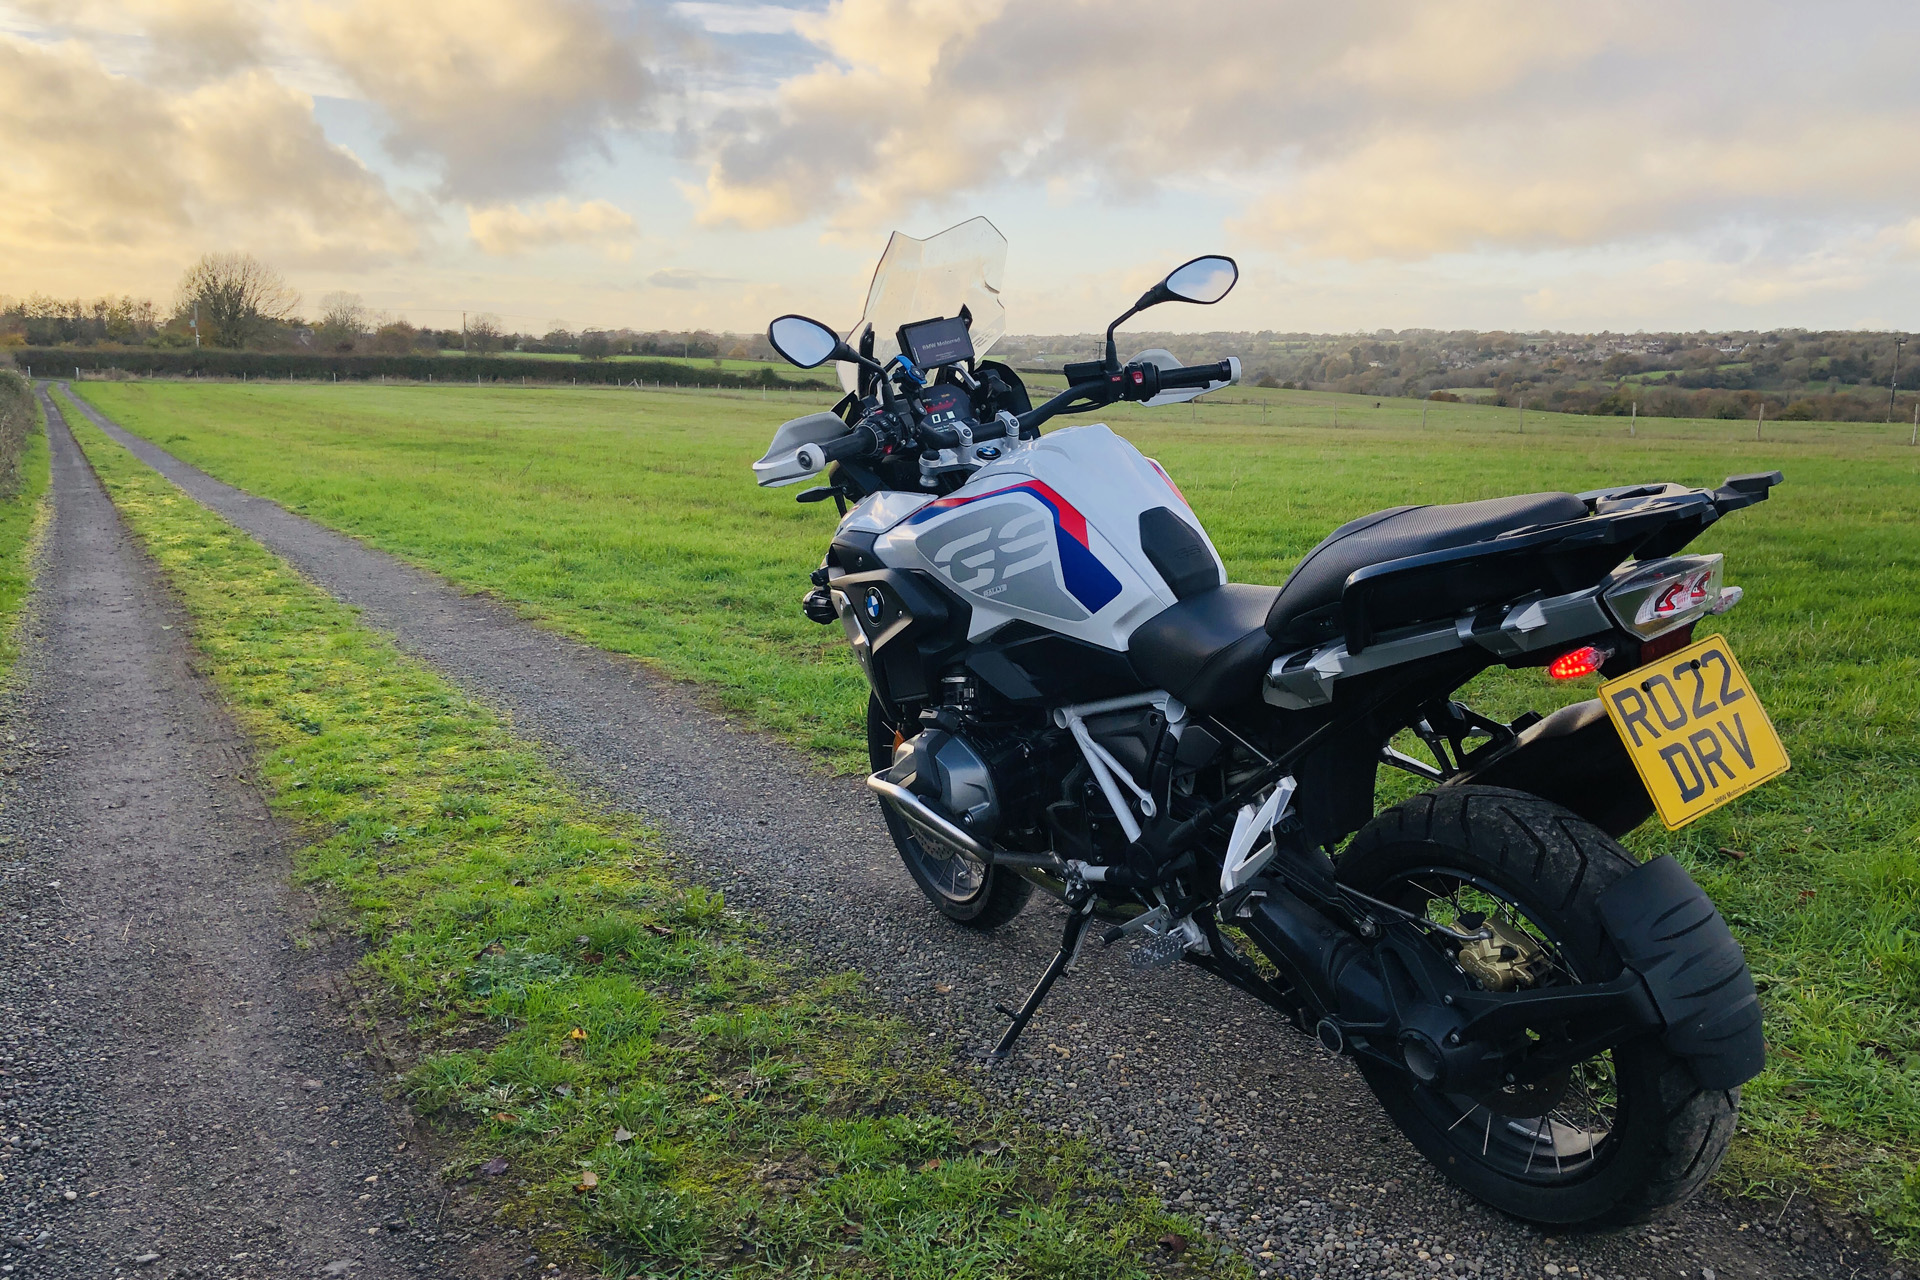 the BMW R1250GS at dusk on a field with little pathway